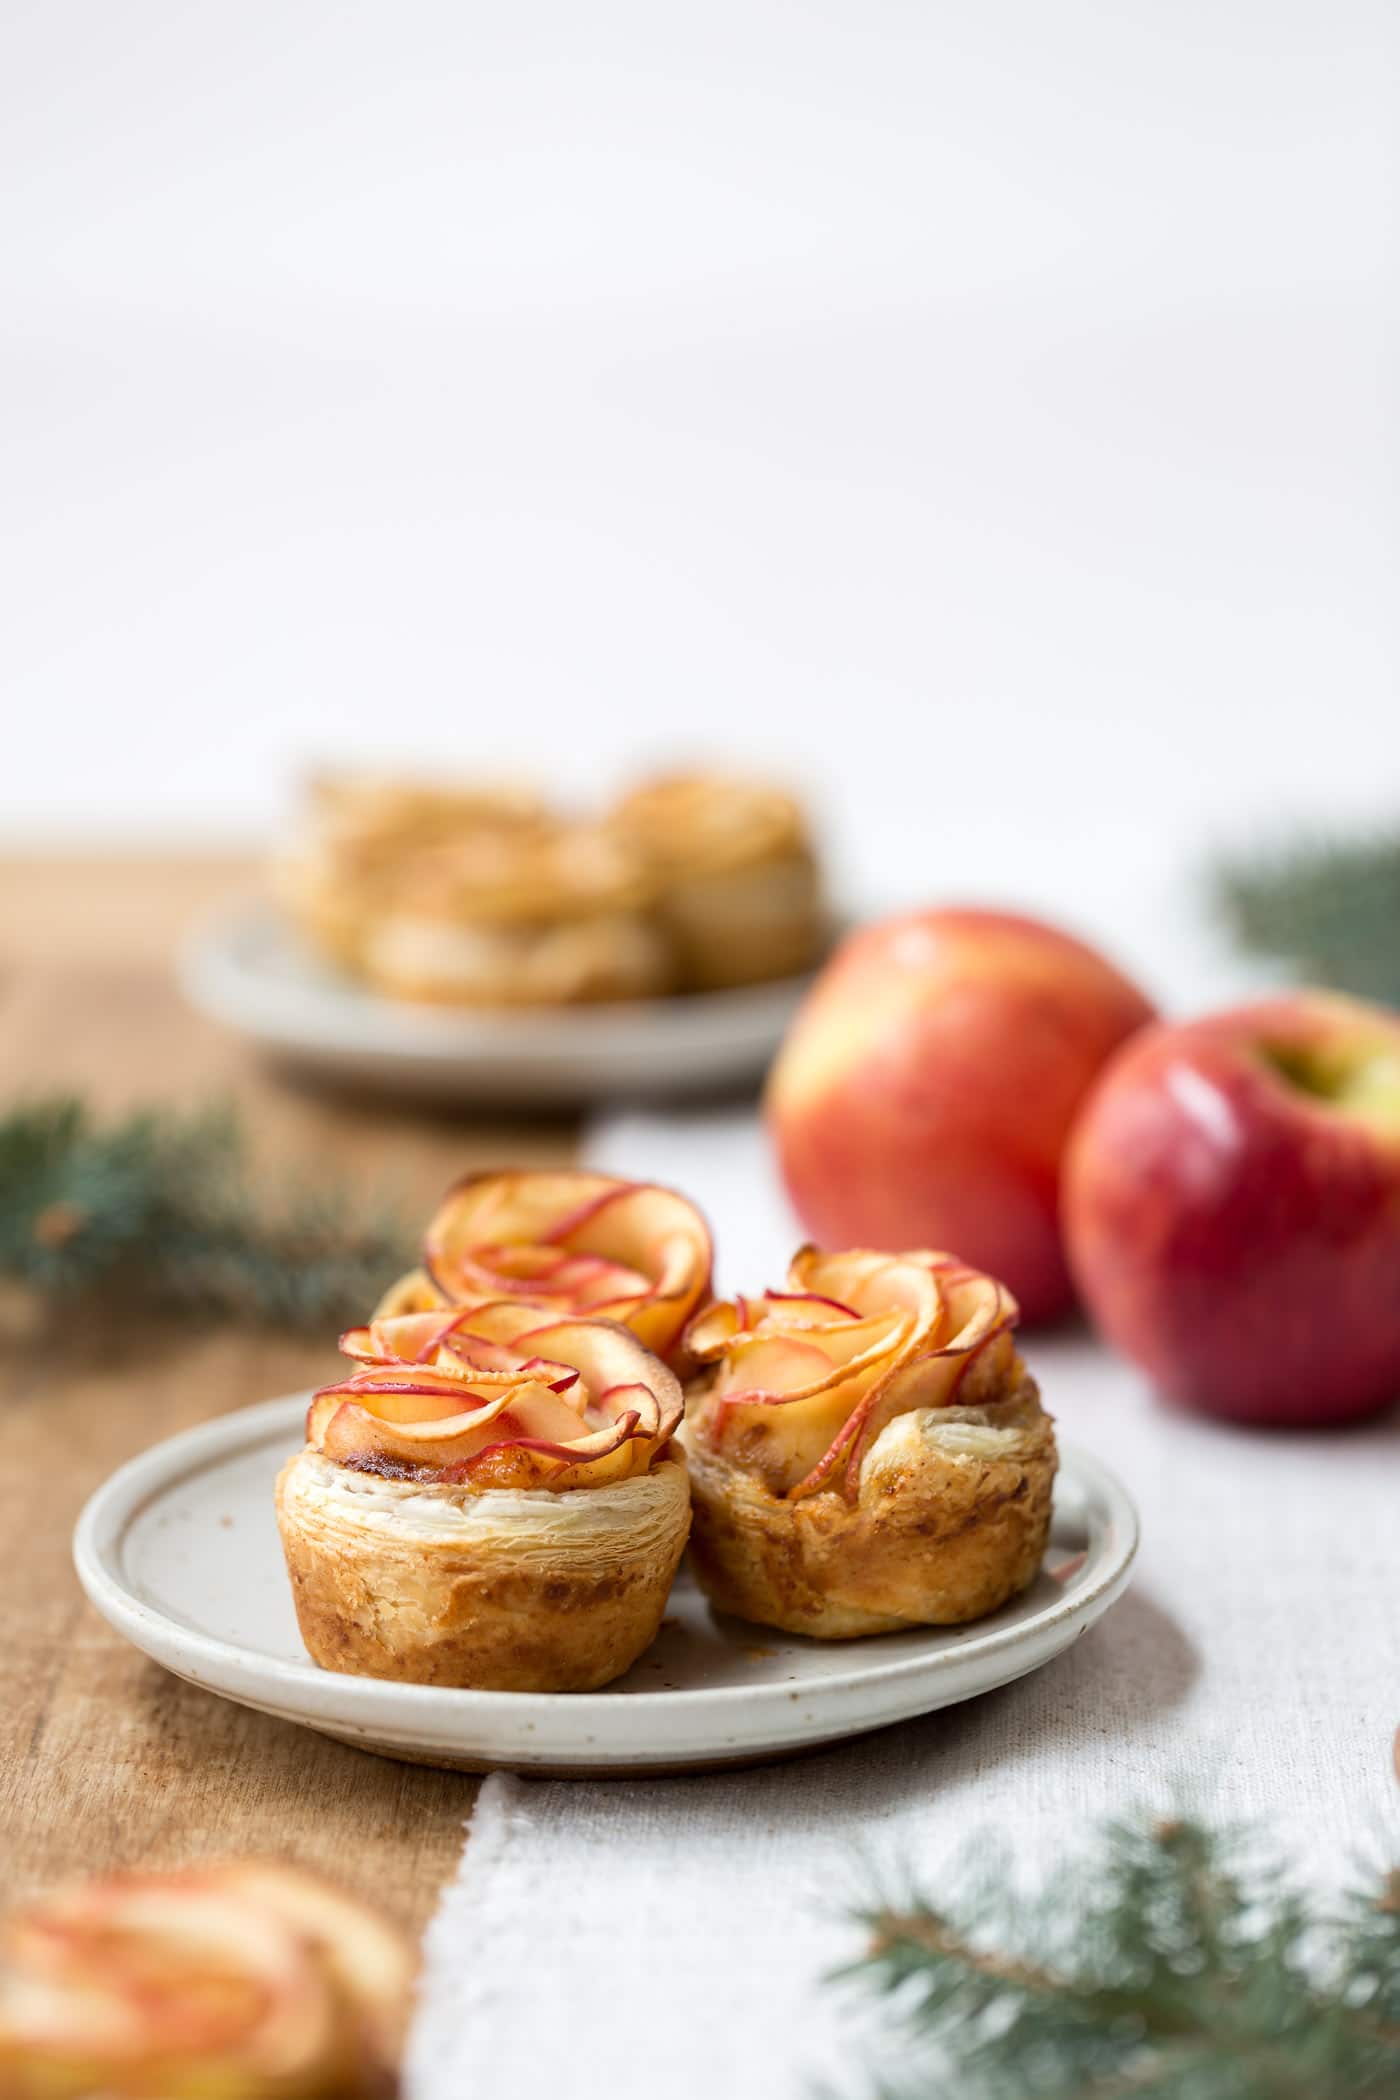 Puff Pastry Apple Roses - Showcasing the leaves of freshly baked apple roses served on small plates.